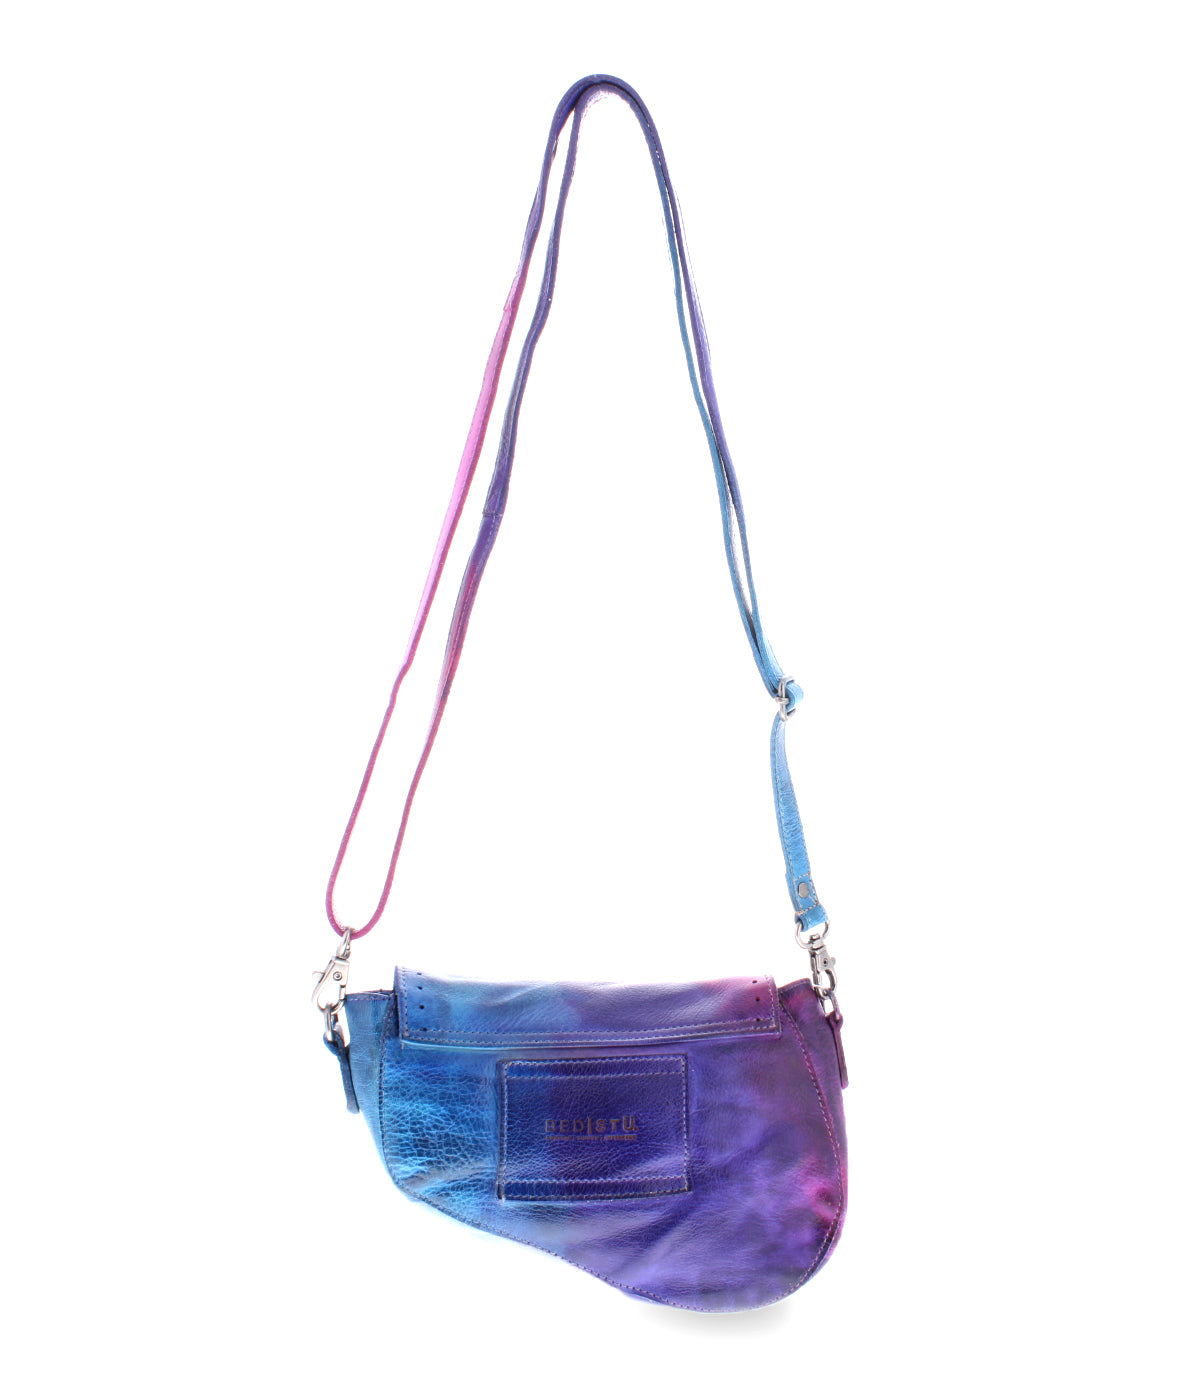 A Priscilla bag by Bed Stu in blue and purple tie dye, with a strap.